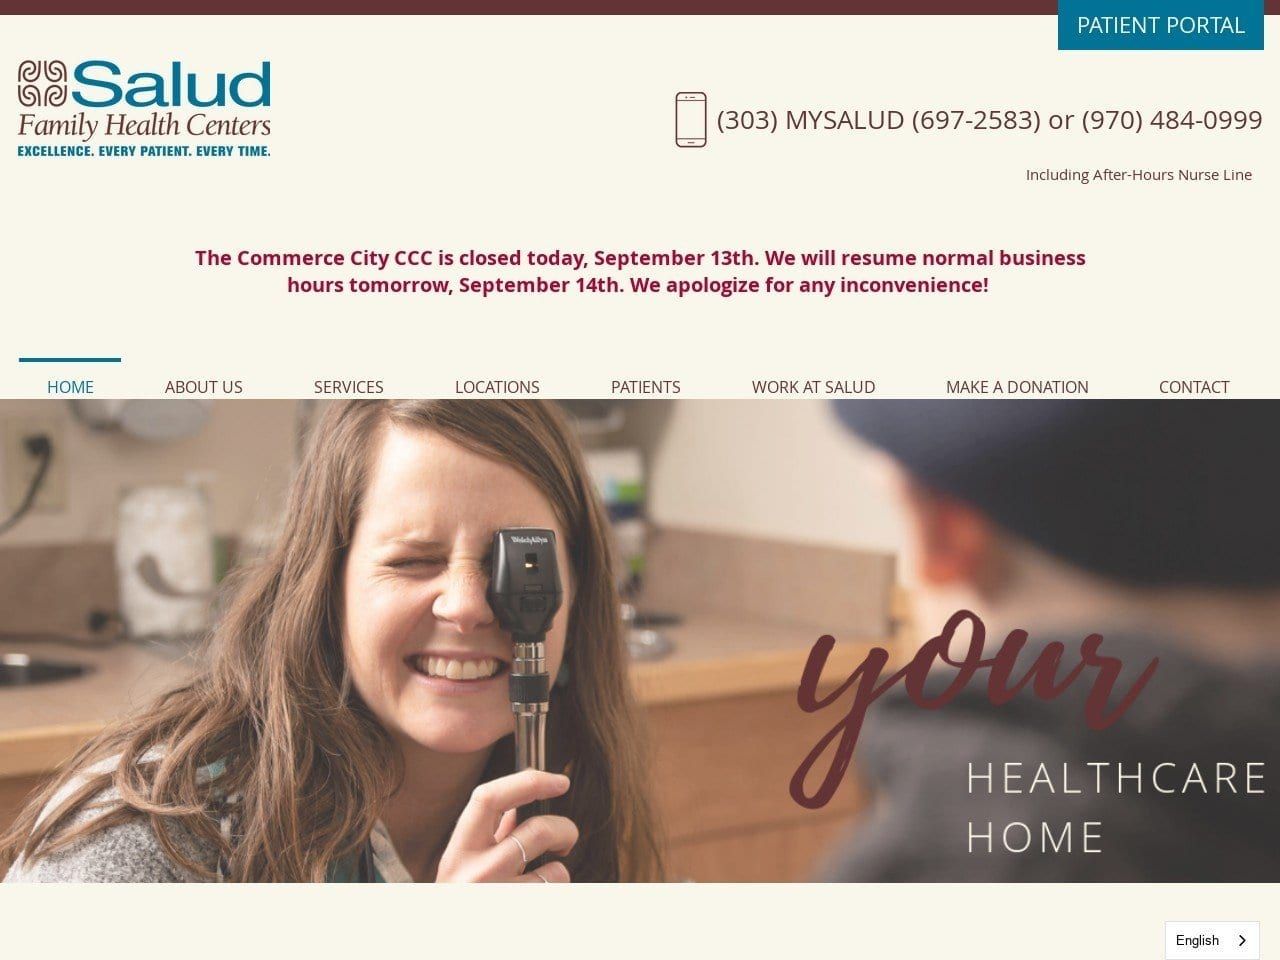 Salud Family Health Center Website Screenshot from saludclinic.org